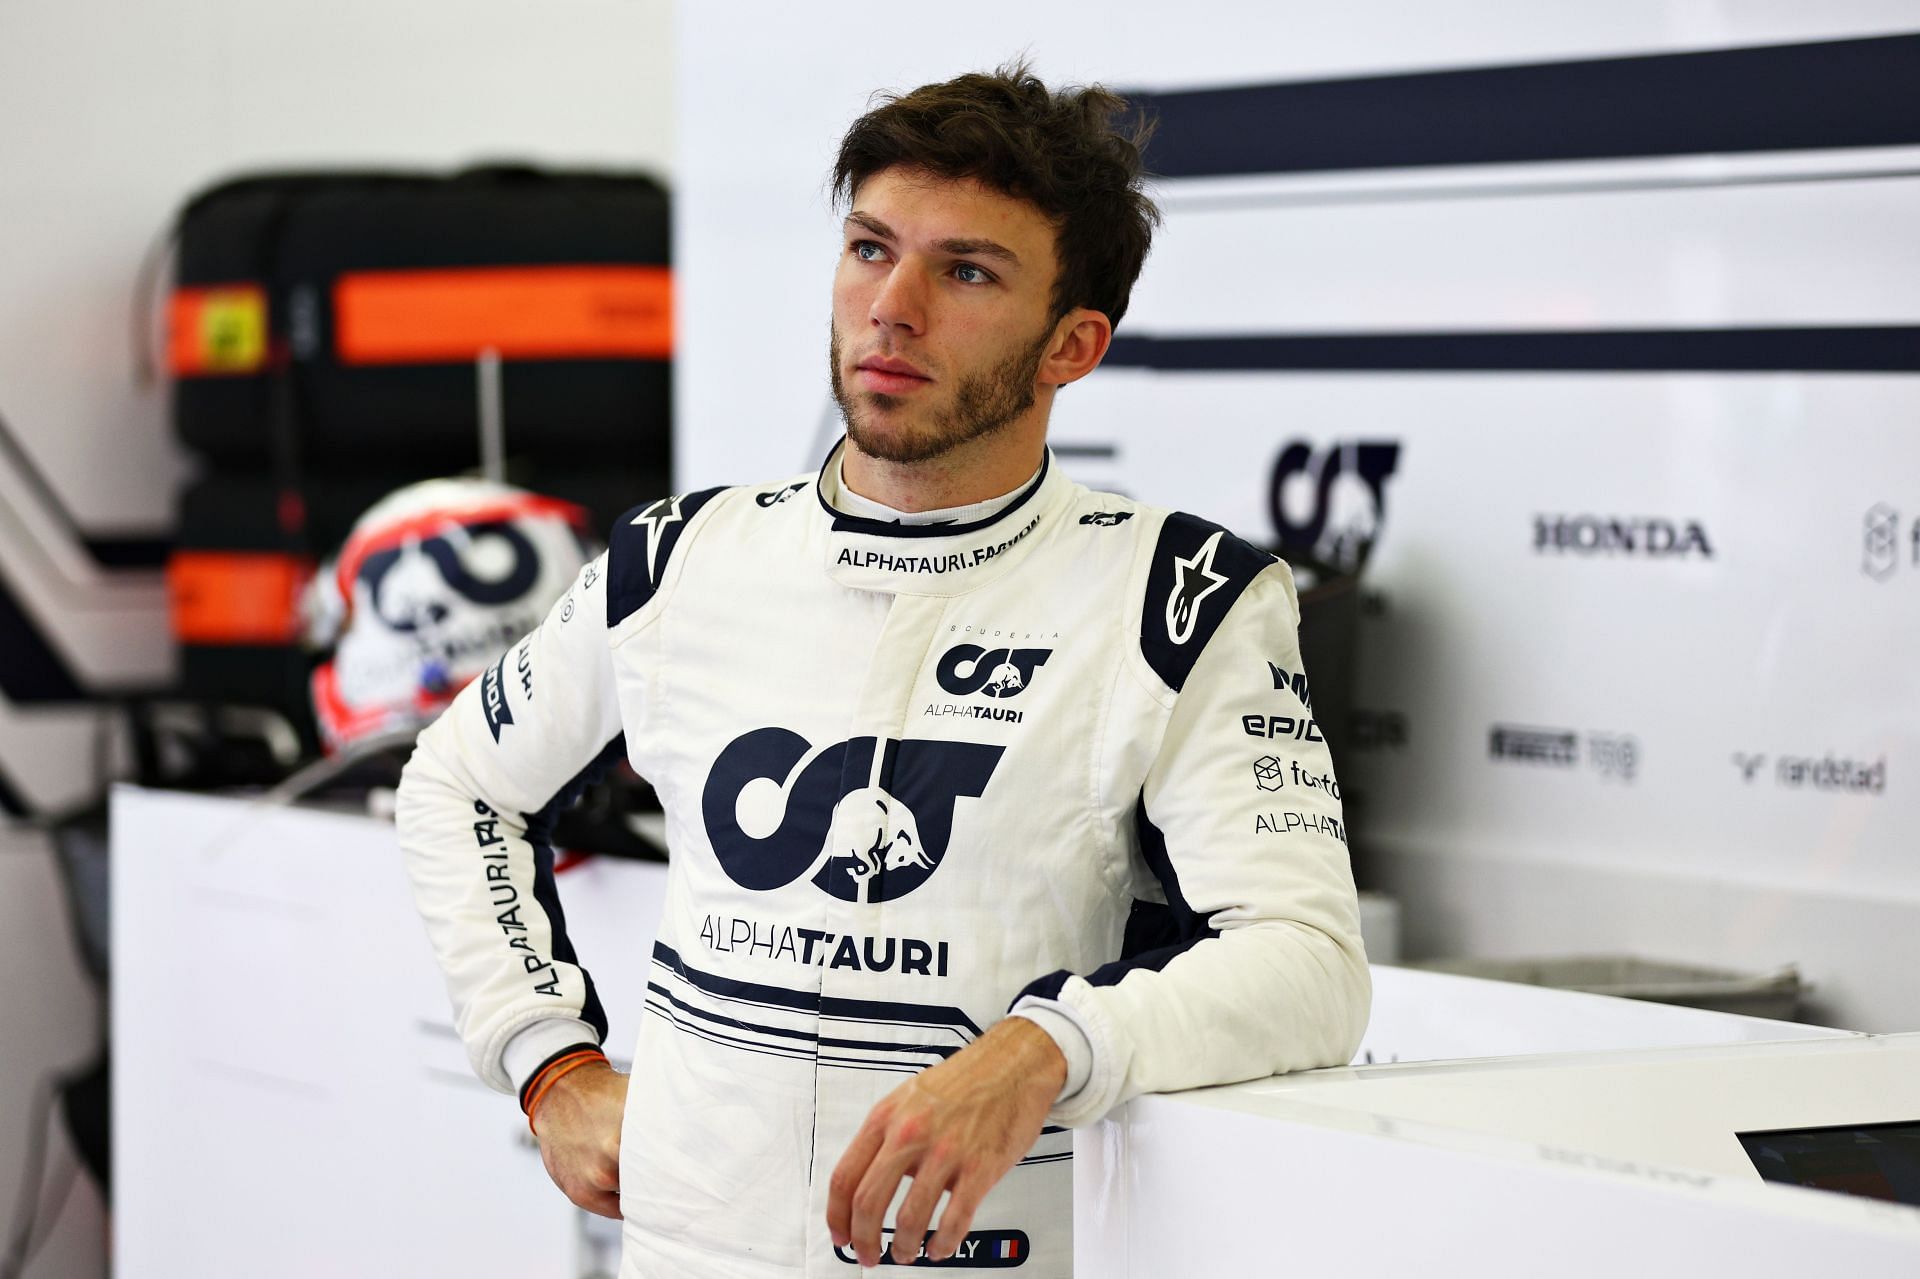 Pierre Gasly in the garage during Day 1 of F1 Testing in Bahrain (Photo by Lars Baron/Getty Images)